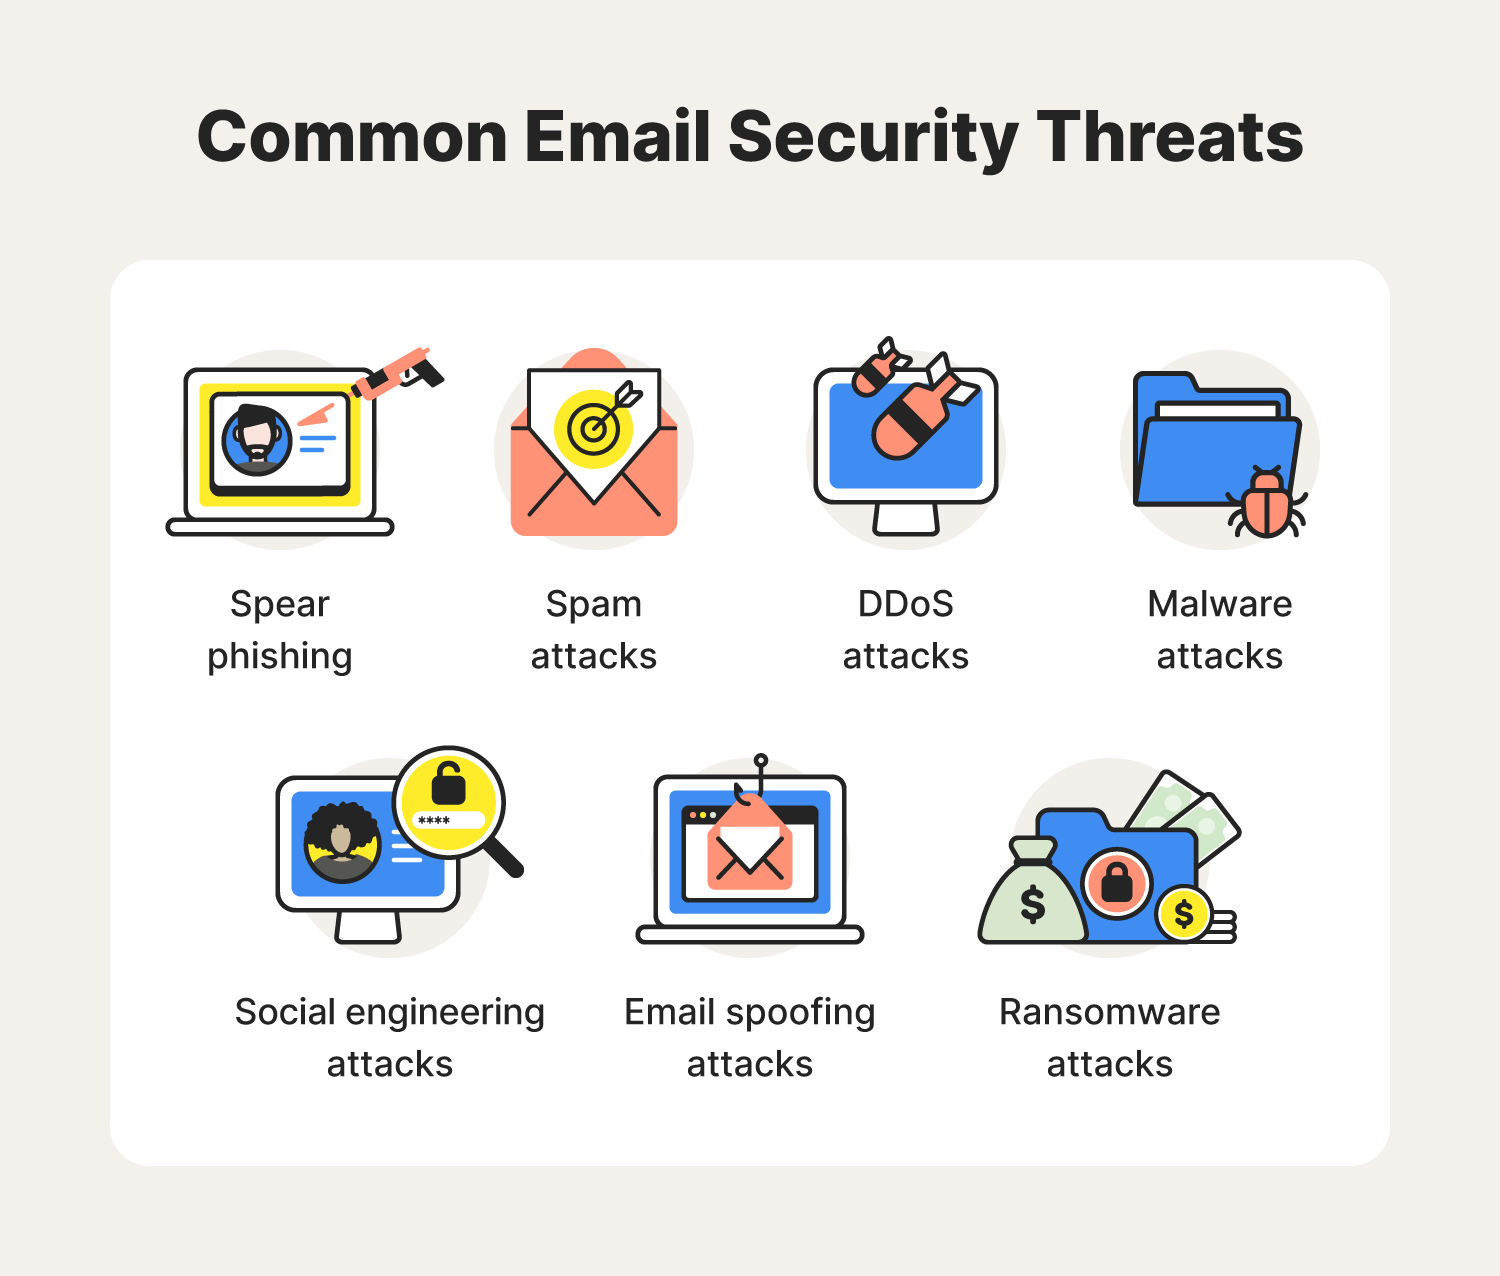 Seven icons allude to common email security threats, from spear phishing to email spoofing and social engineering attacks in between.